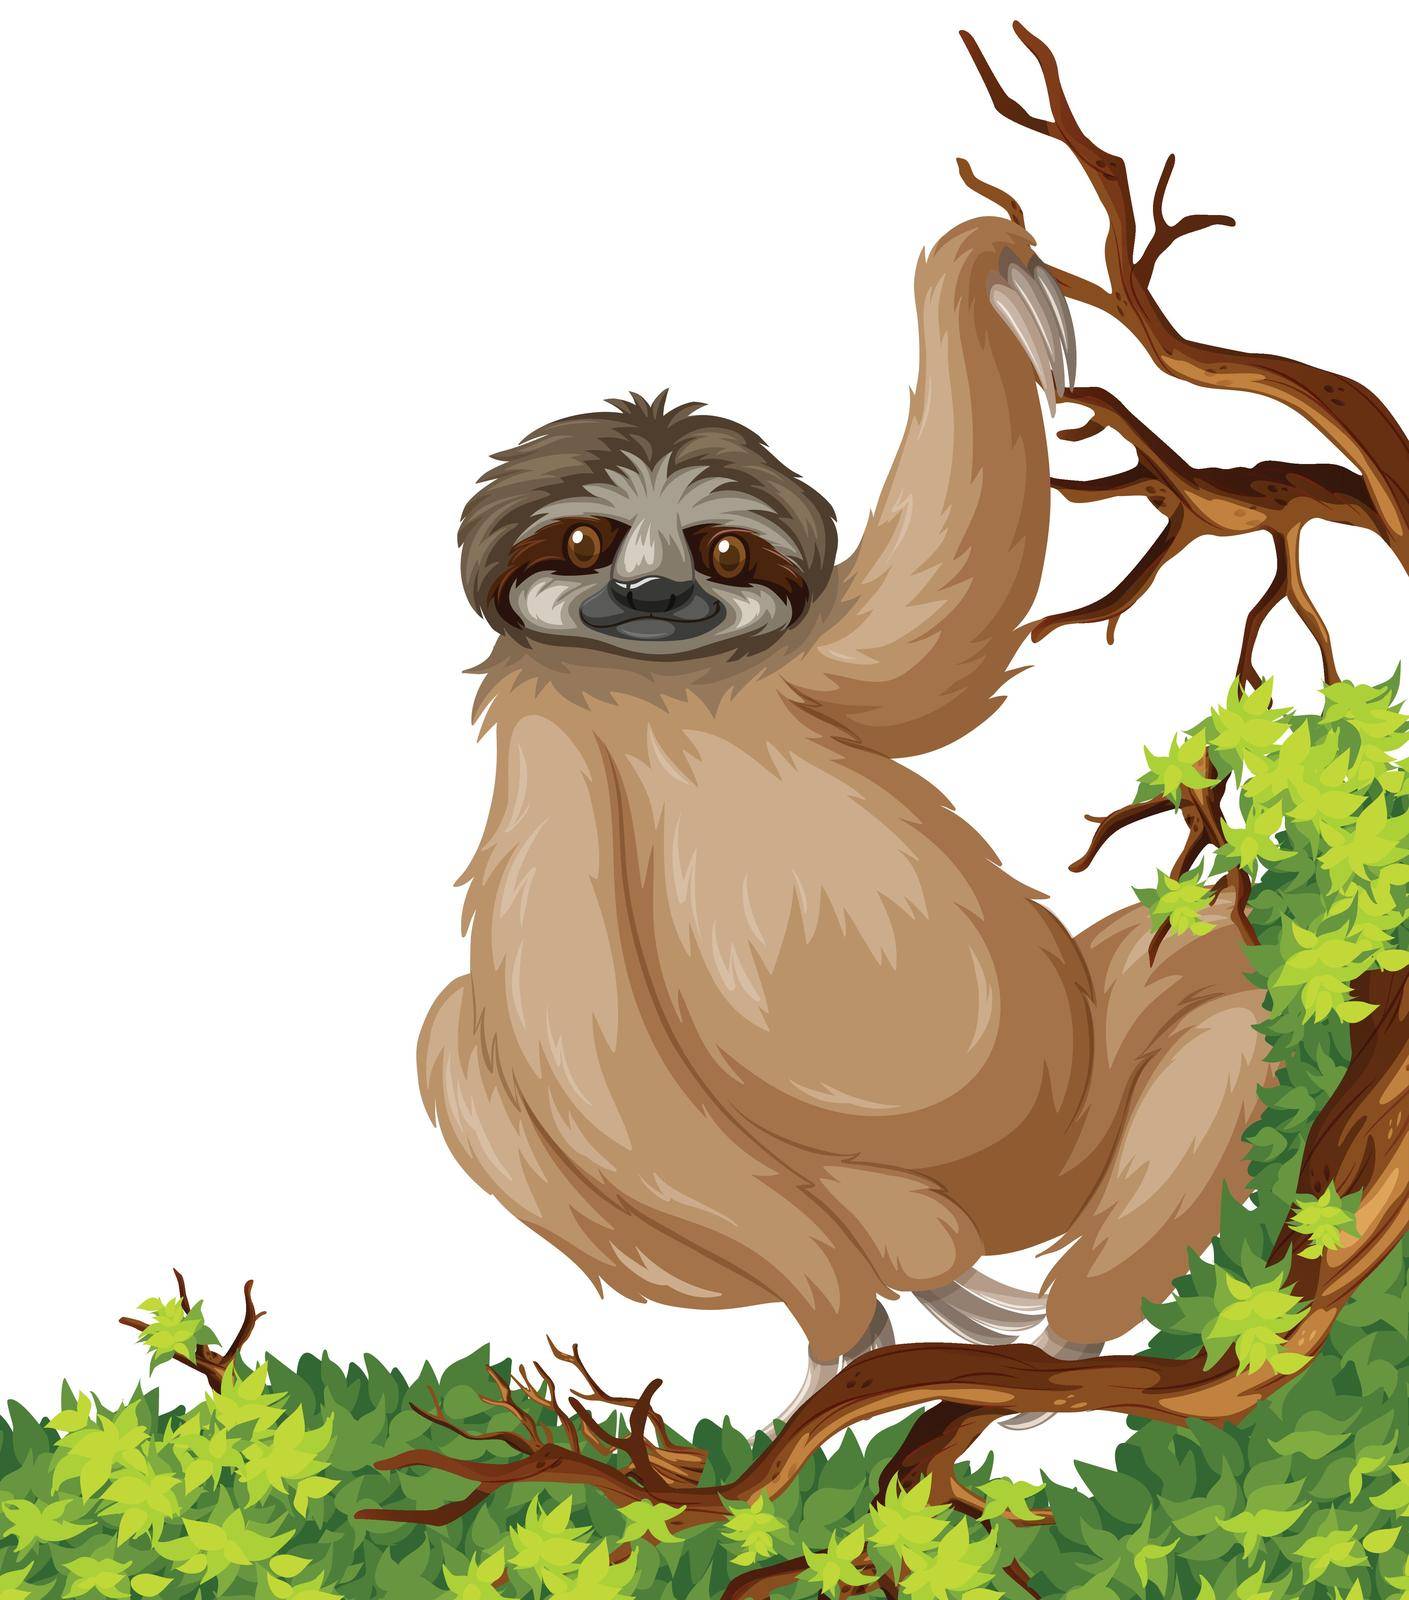 Cute sloth on branch by iimages